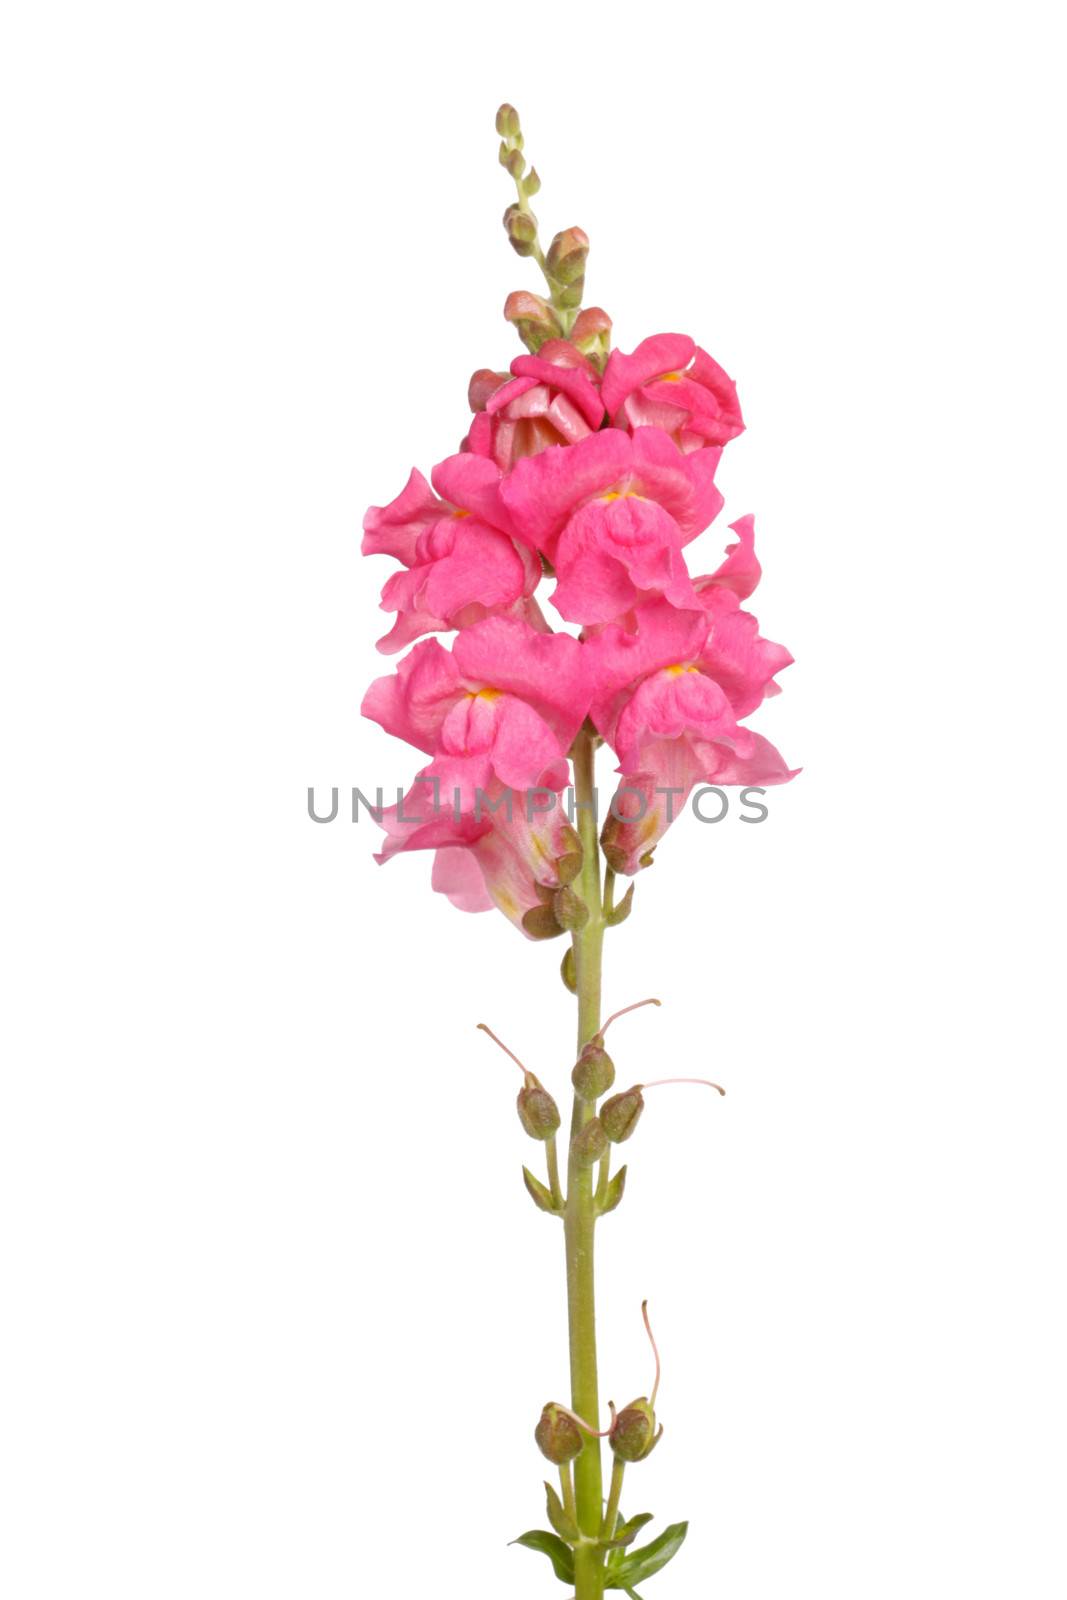 Single stem with pink flowers of snapdragons (Antirrhinum majus) isolated against a white background